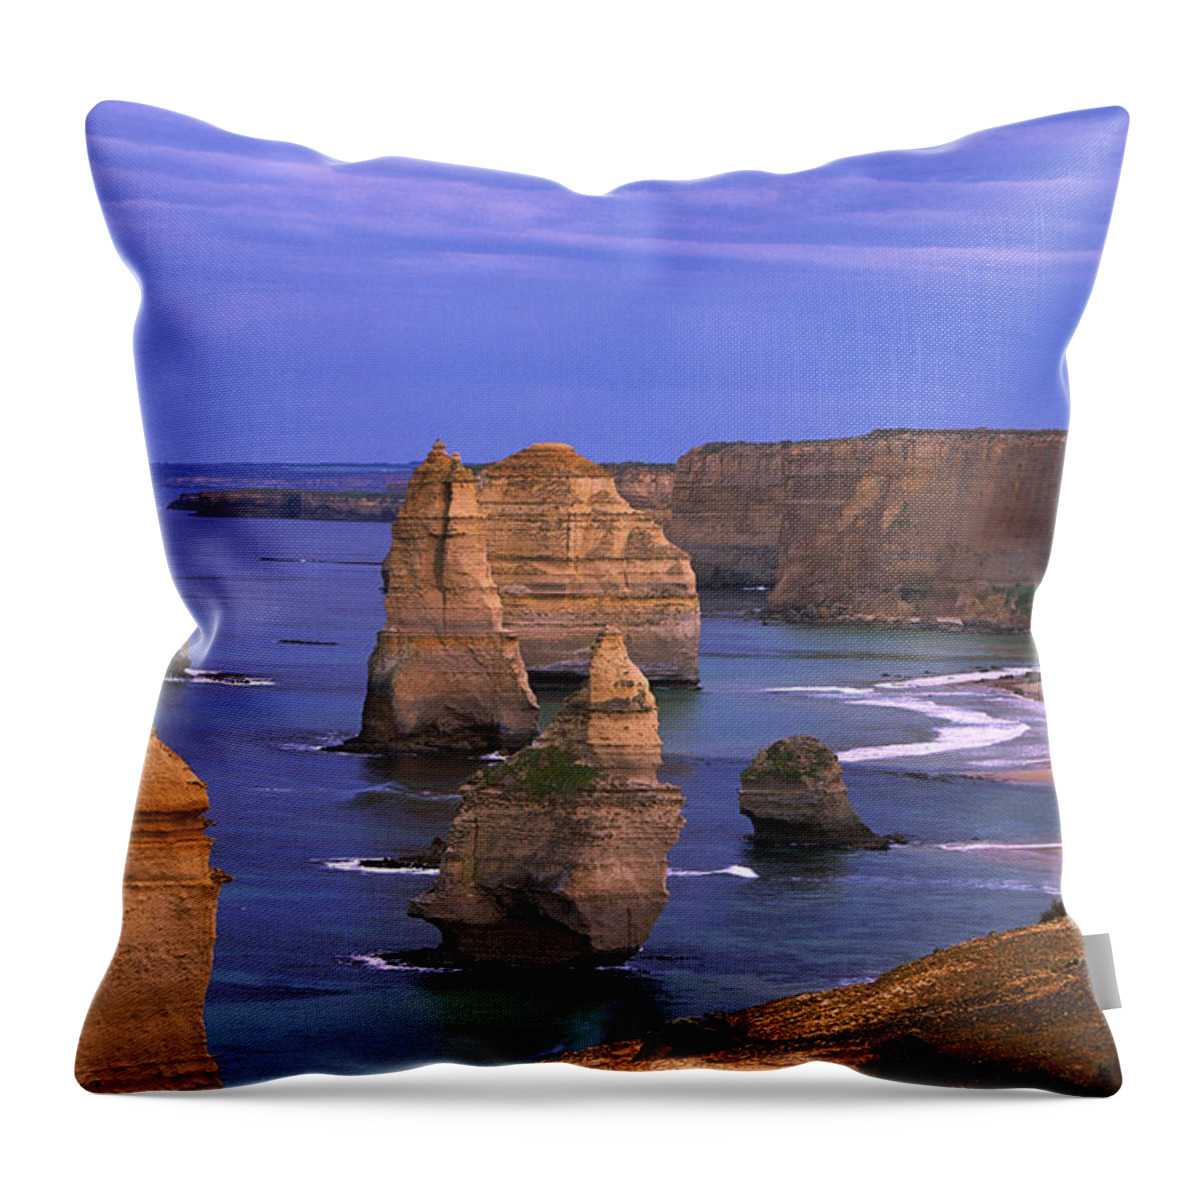 00197868 Throw Pillow featuring the photograph Twelve Apostles, Port Campbell by Konrad Wothe